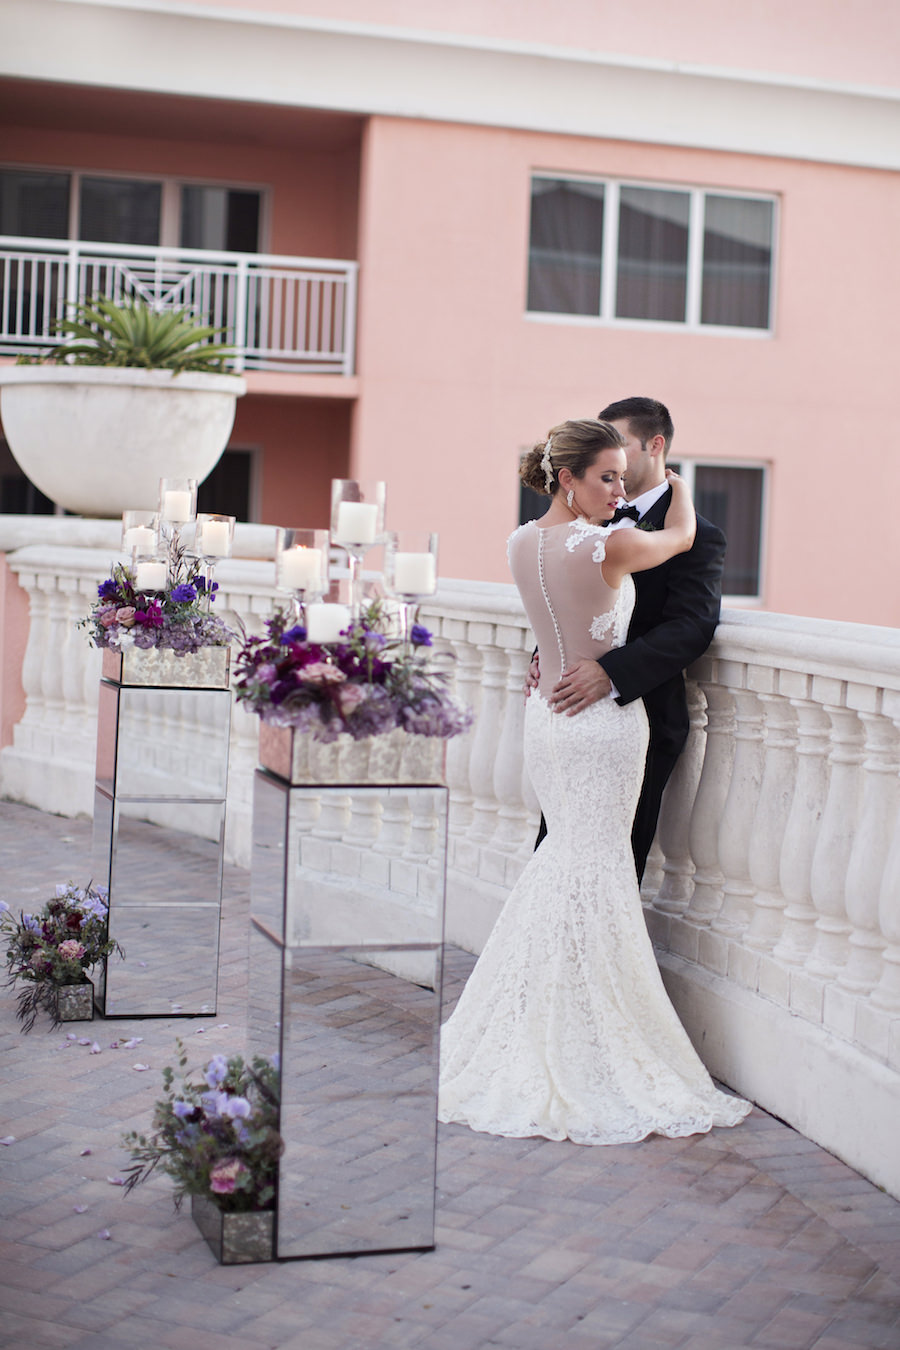 Mirrored Wedding Ceremony Decor Floral Stands | Bride and Groom Wedding Portrait | Lace Wedding Dress from The Bride Tampa | Large Purple and Blush Pink Wedding Bouquet | Clearwater Wedding Photographer Djamel Photography